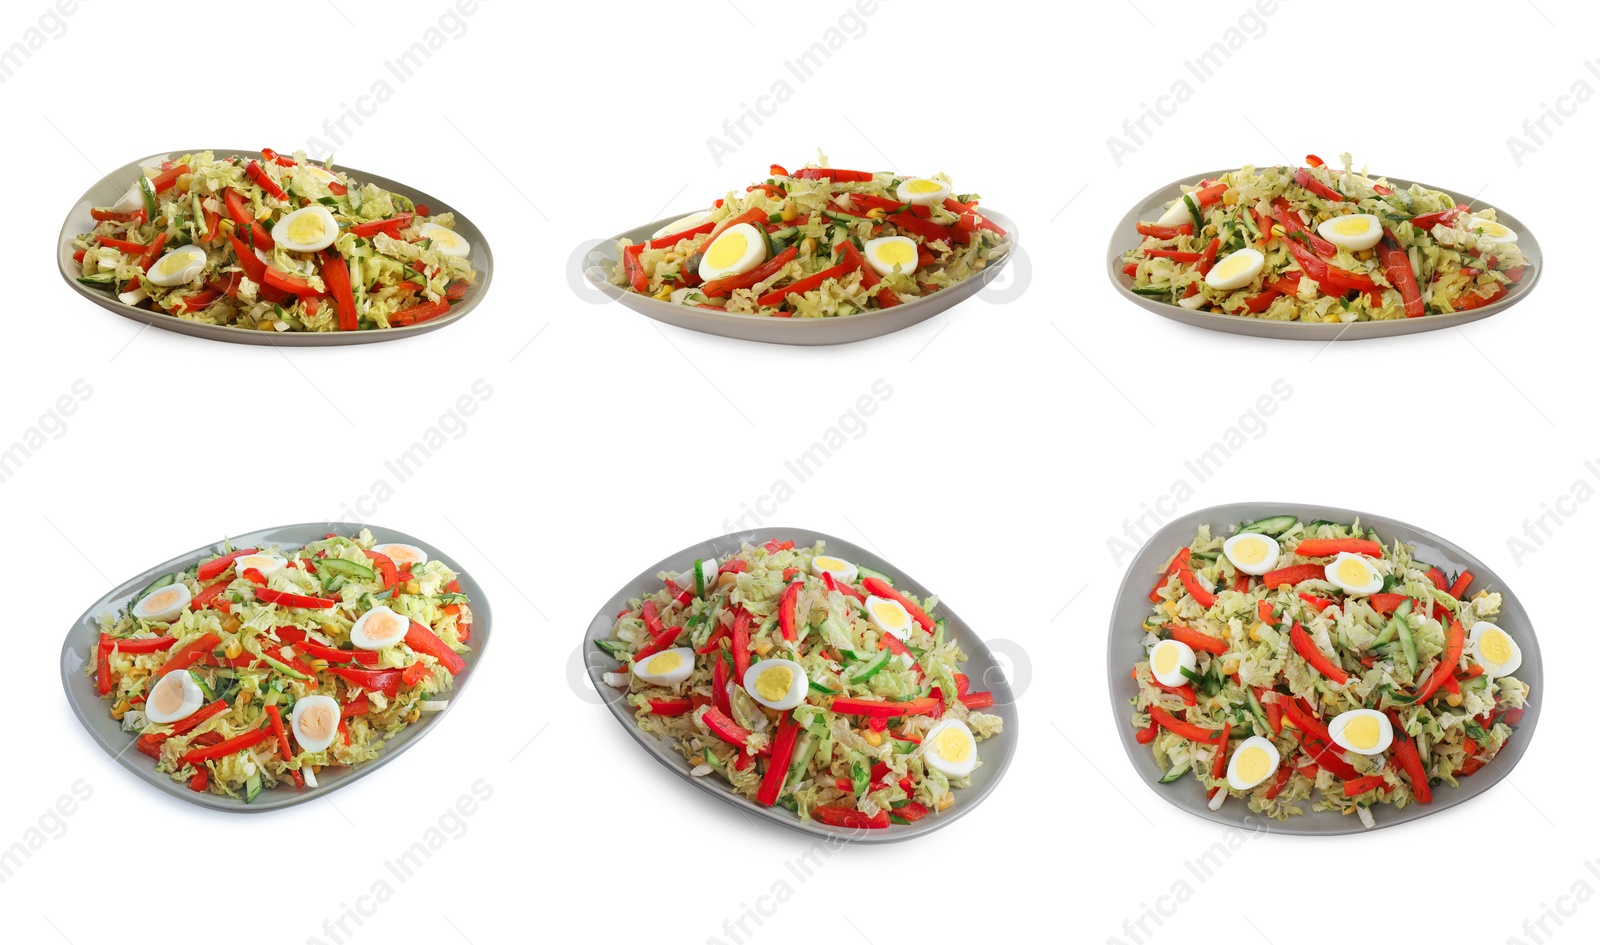 Image of Plates of tasty salad with Chinese cabbage and eggs on white background, different sides. Collage design